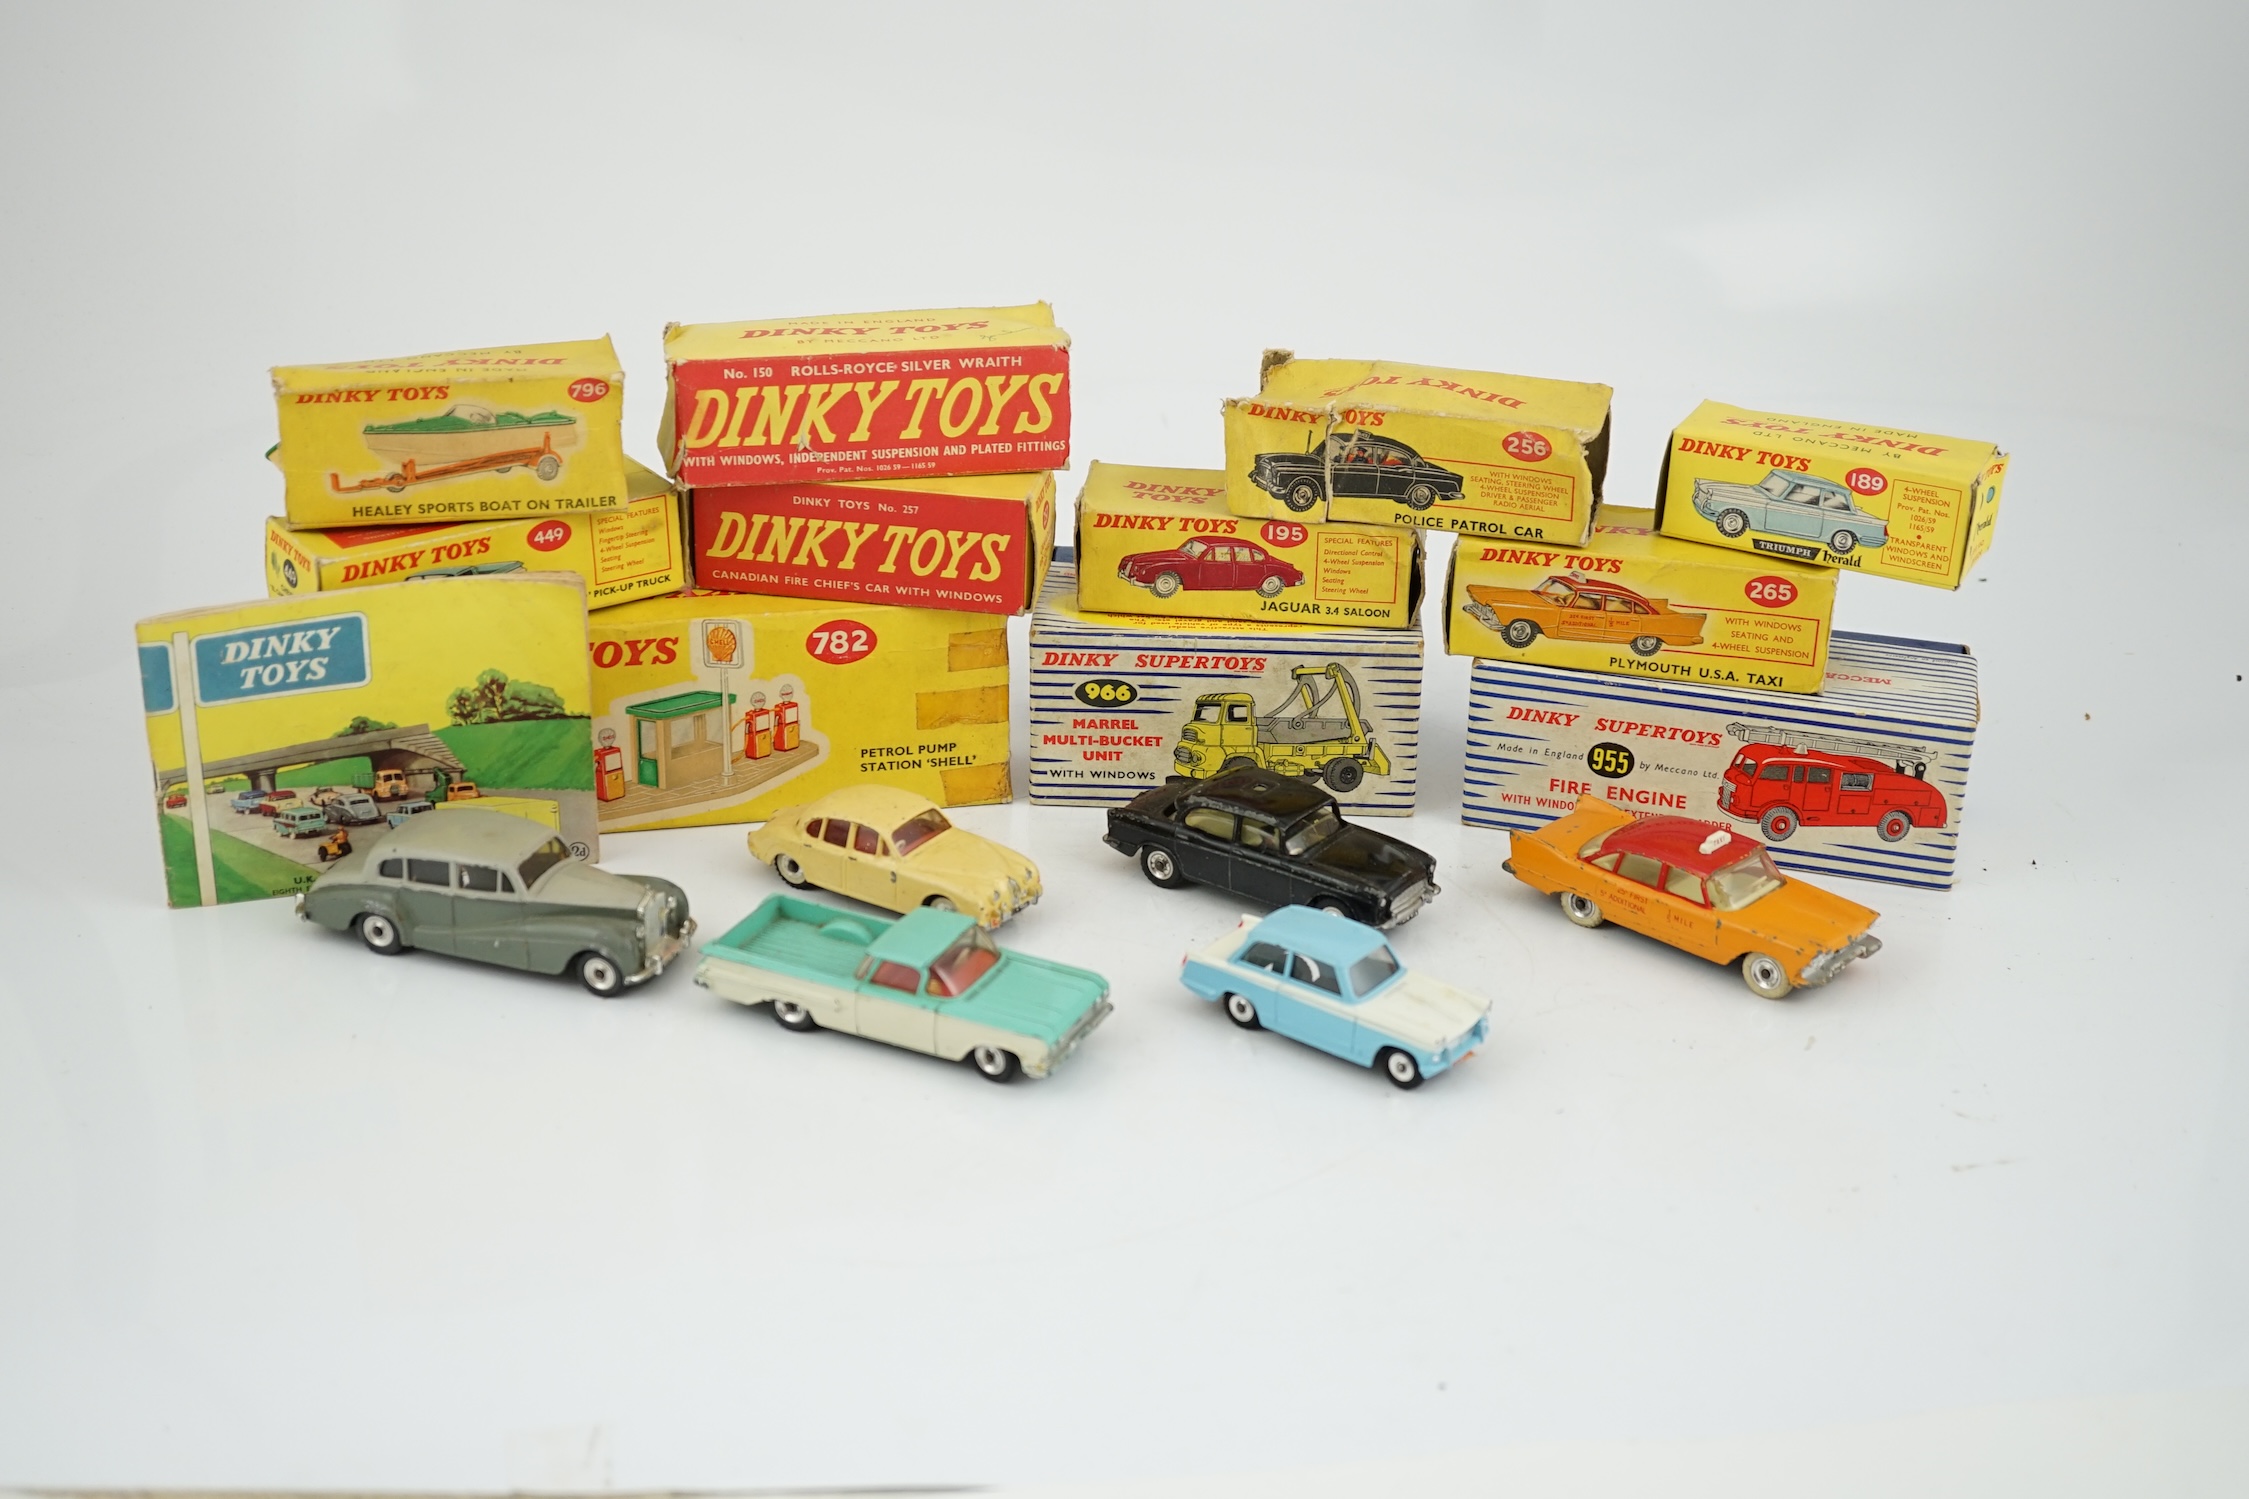 Eleven boxed Dinky Toys; a Triumph Herald (189), a Plymouth U.S.A. Taxi (265), a Chevrolet ‘El - Image 2 of 8